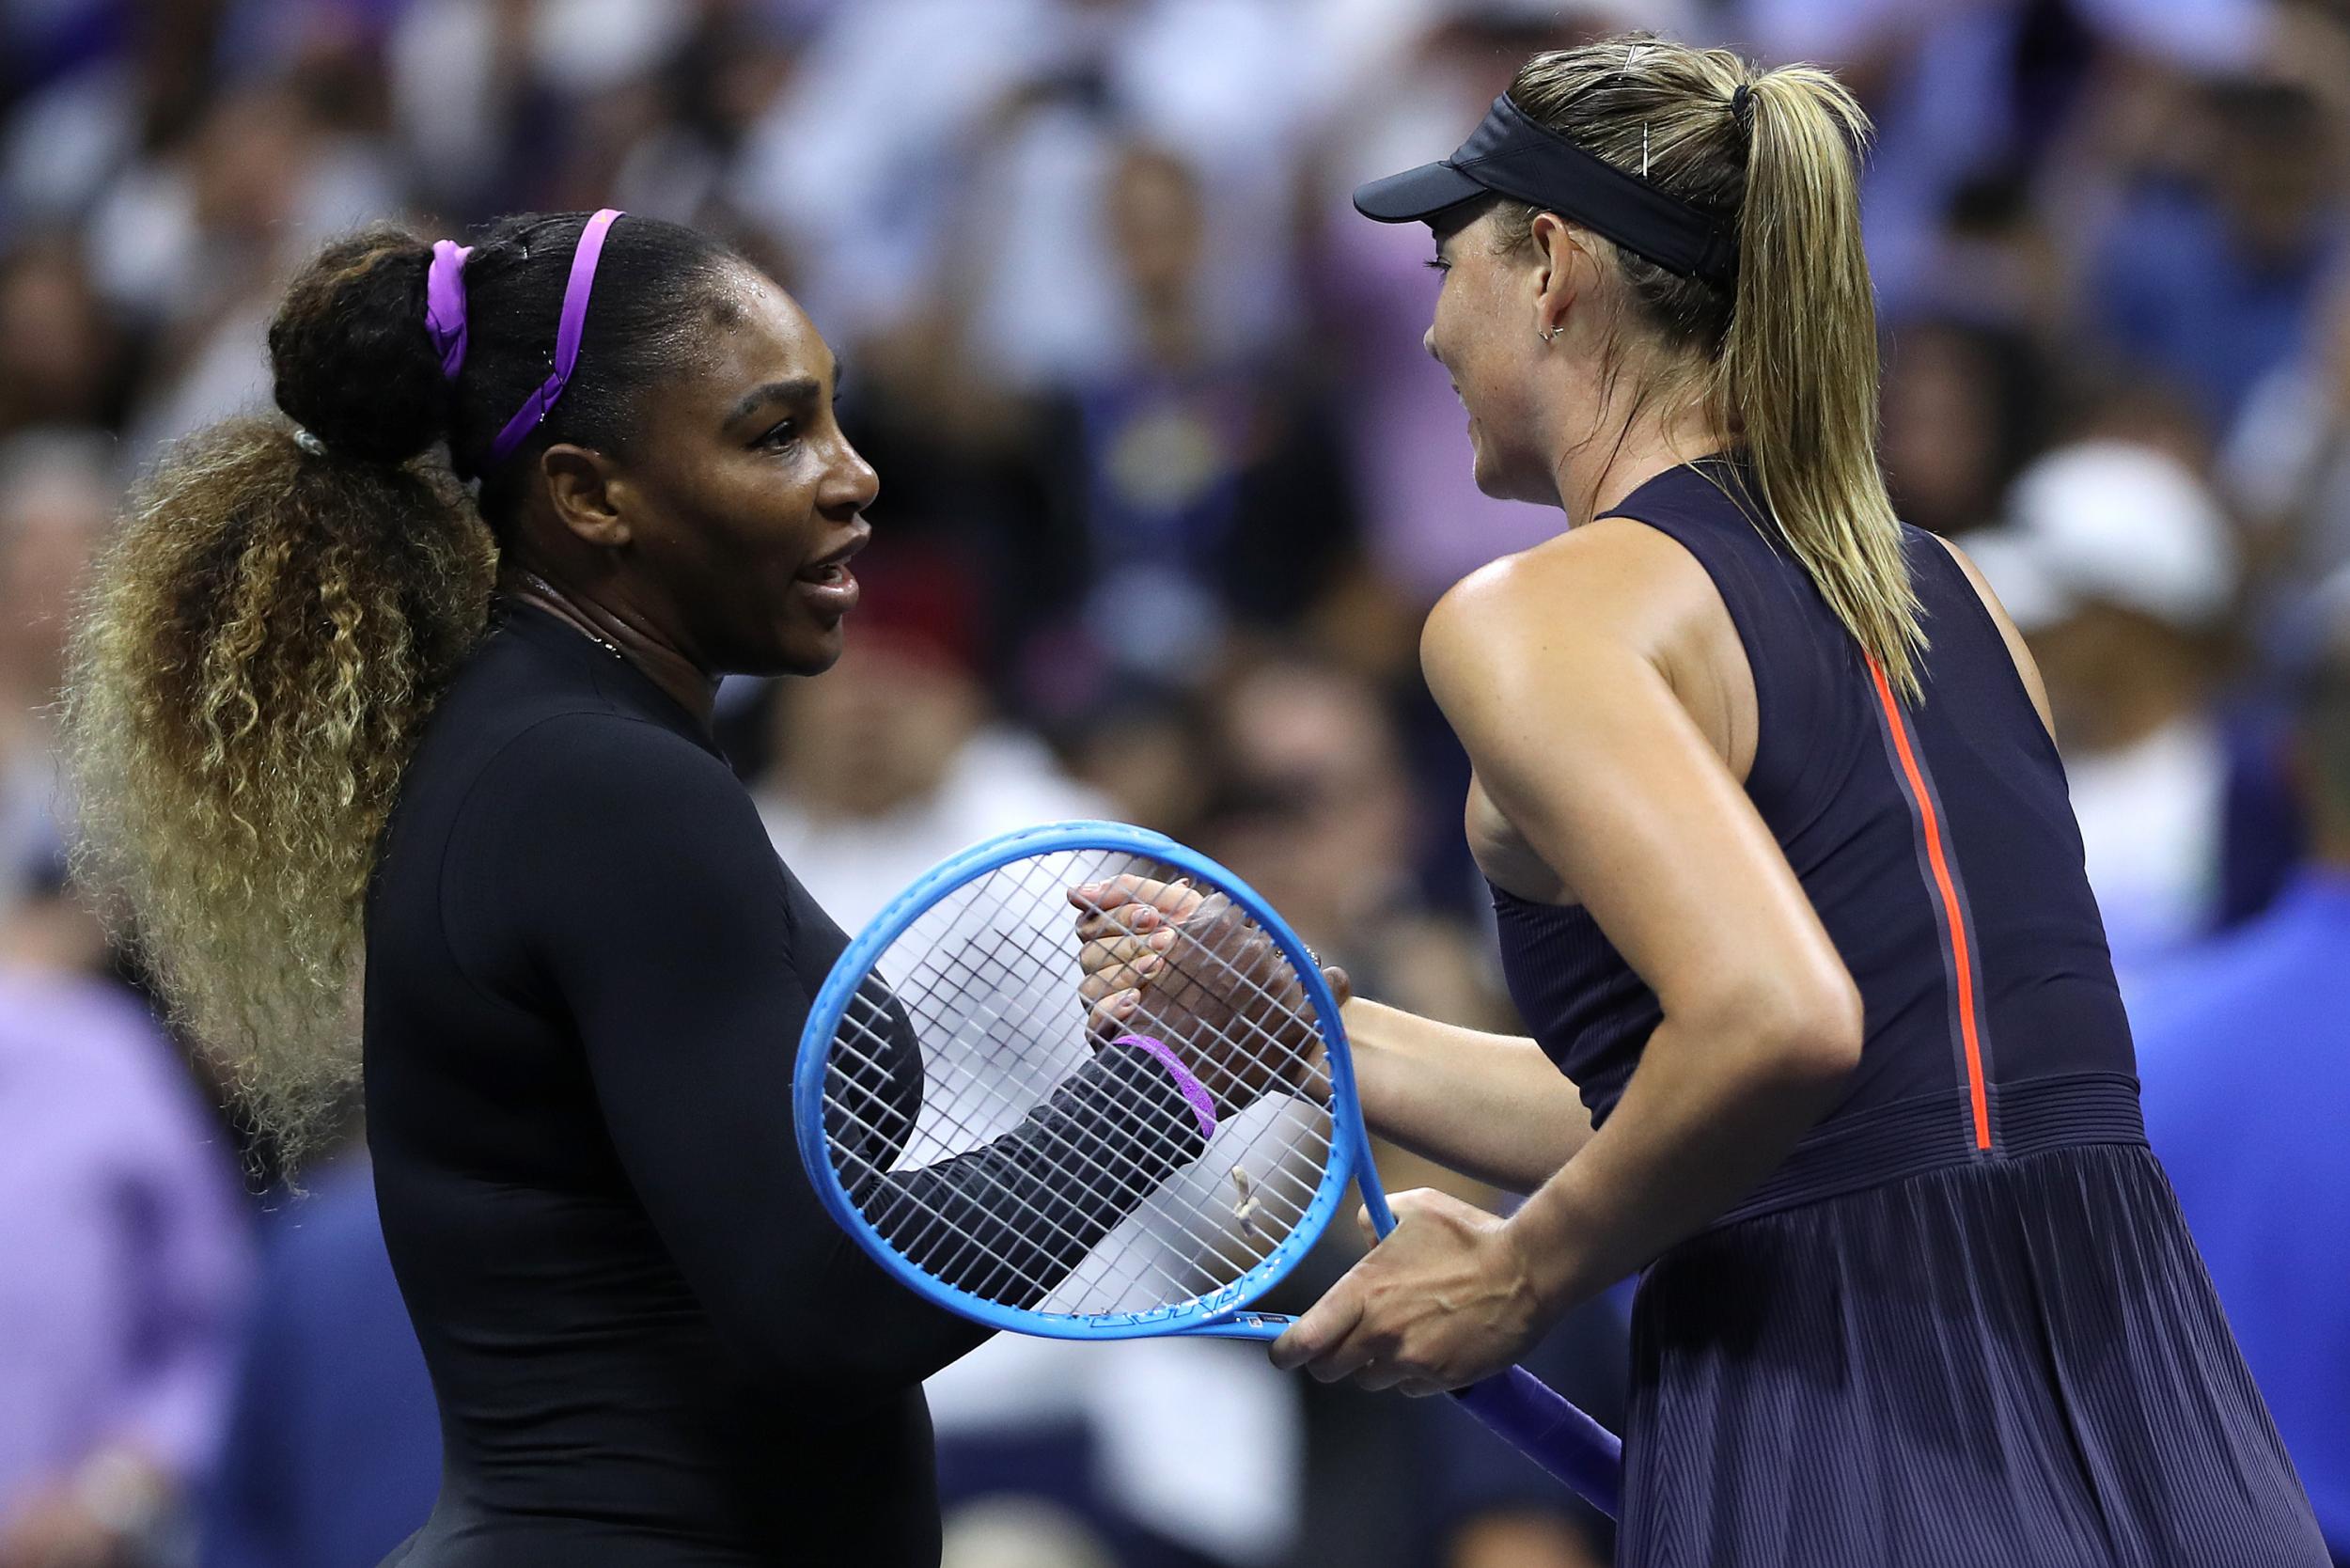 Serena Williams and Maria Sharapova shake hands following their first round match at the 2019 US Open